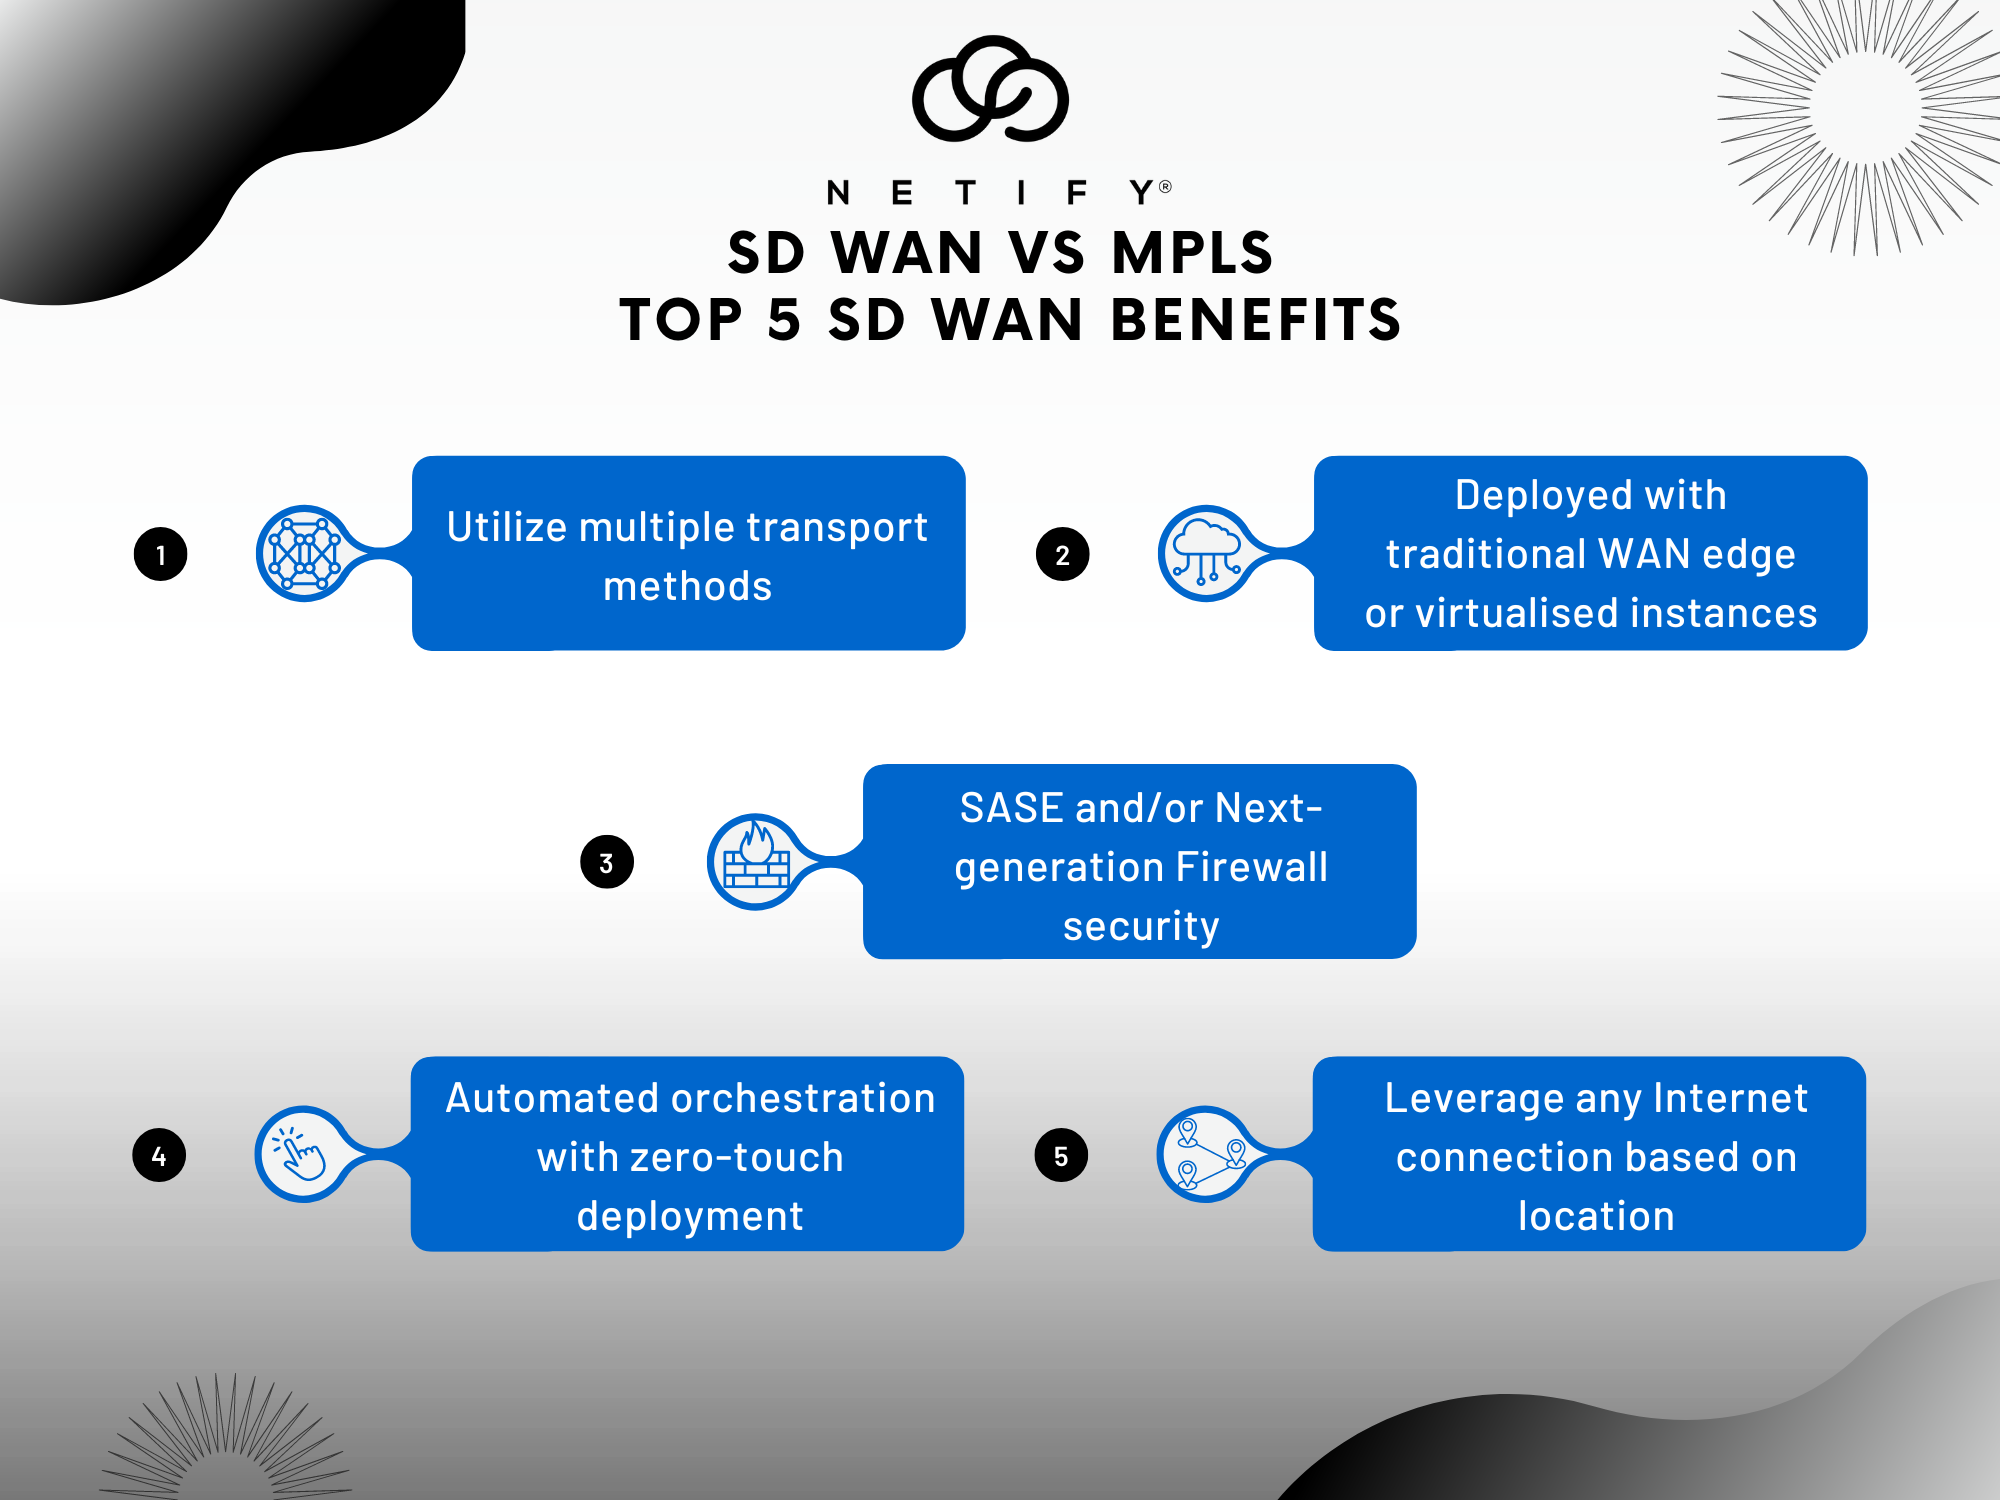 What is the difference between SD WAN vs MPLS?